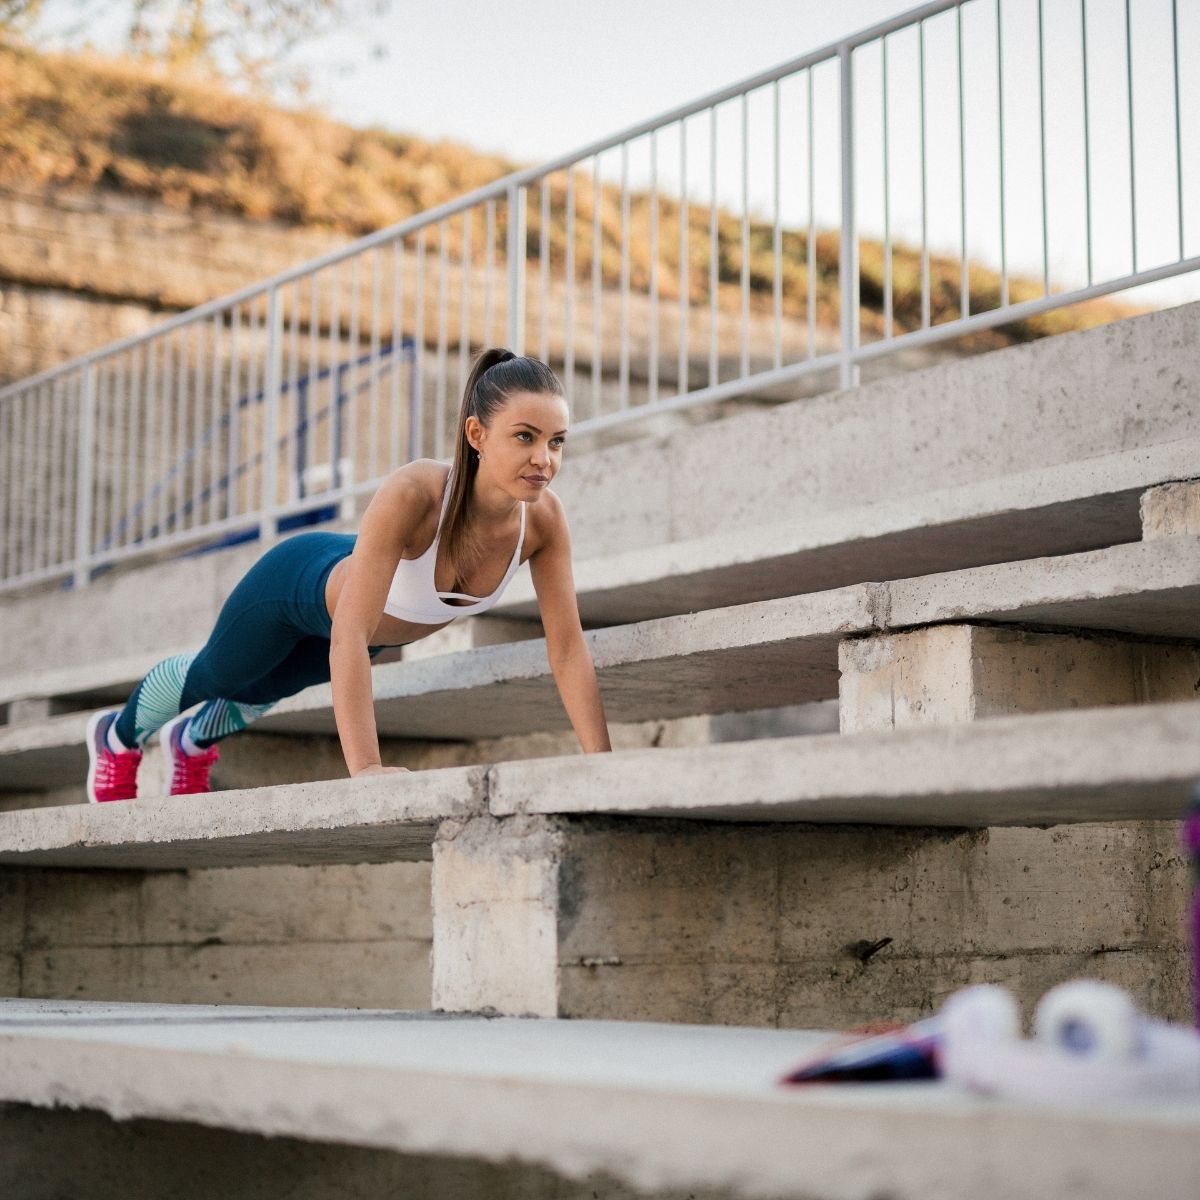 Stairs and burpees workout plan